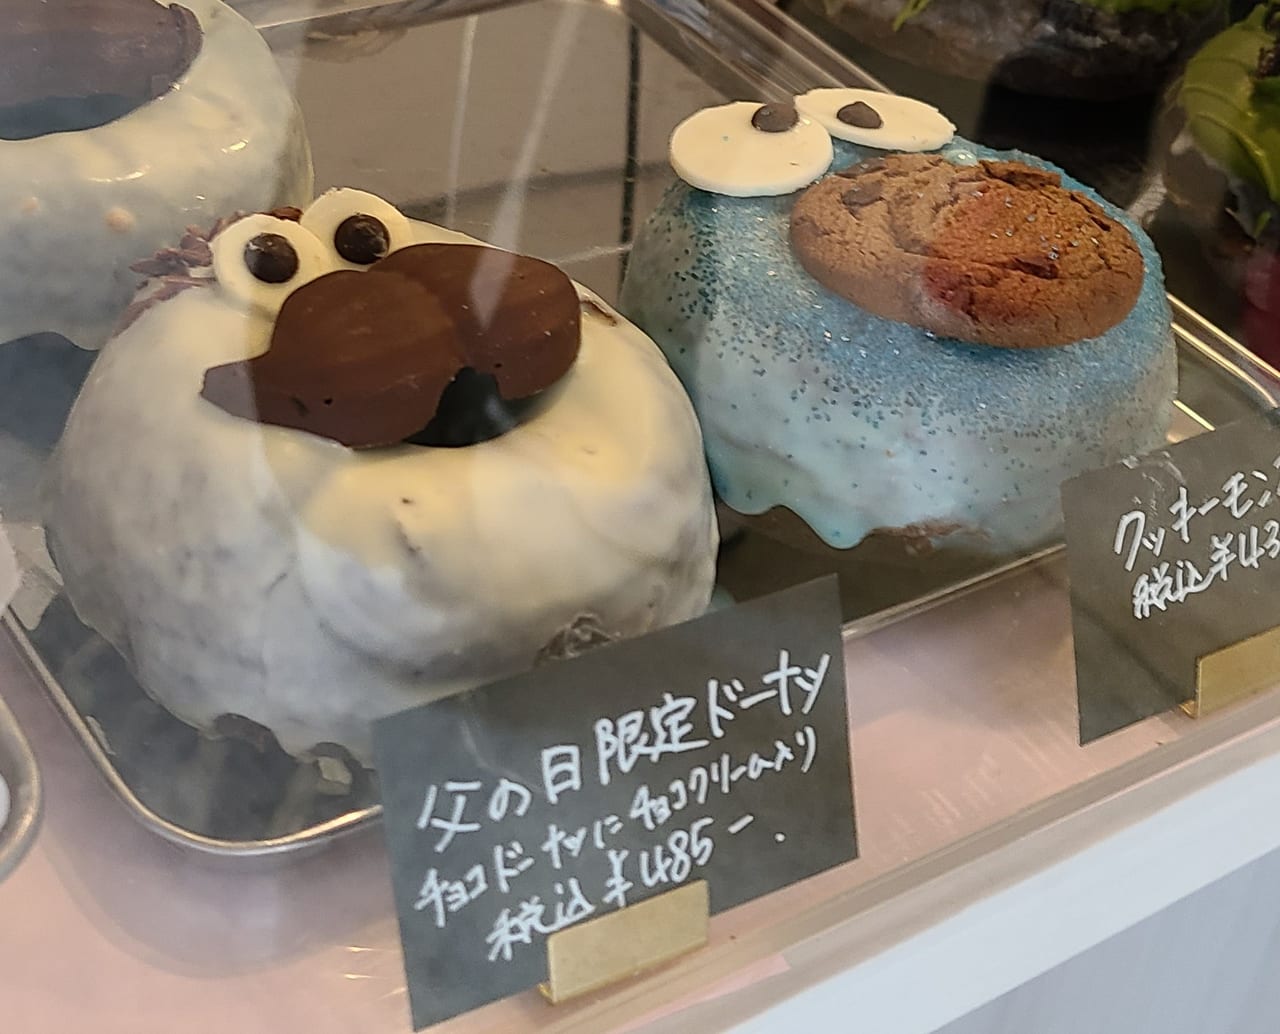 TWO SEVEN-O DONUTS